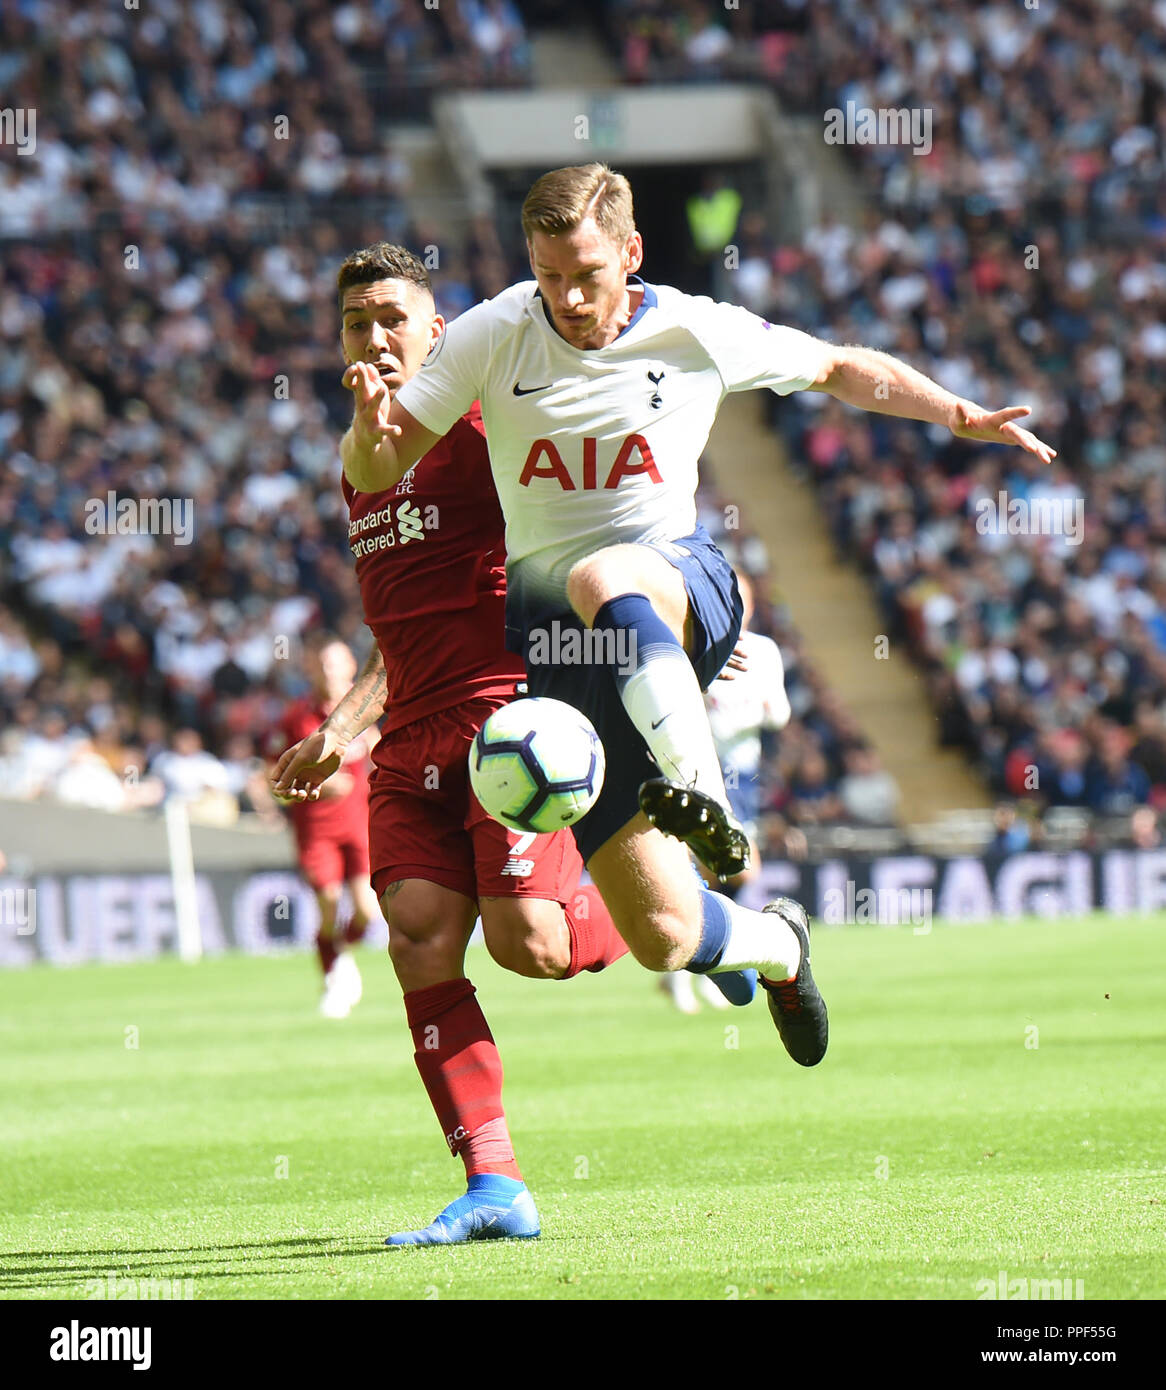 Jan Vertonghen of Spurs gets ahead of Roberto Firmino of Liverpool during the Premier League match between Tottenham Hotspur and Liverpool at Wembley Stadium , London , 15 Sept 2018 Editorial use only. No merchandising. For Football images FA and Premier League restrictions apply inc. no internet/mobile usage without FAPL license - for details contact Football Dataco Stock Photo